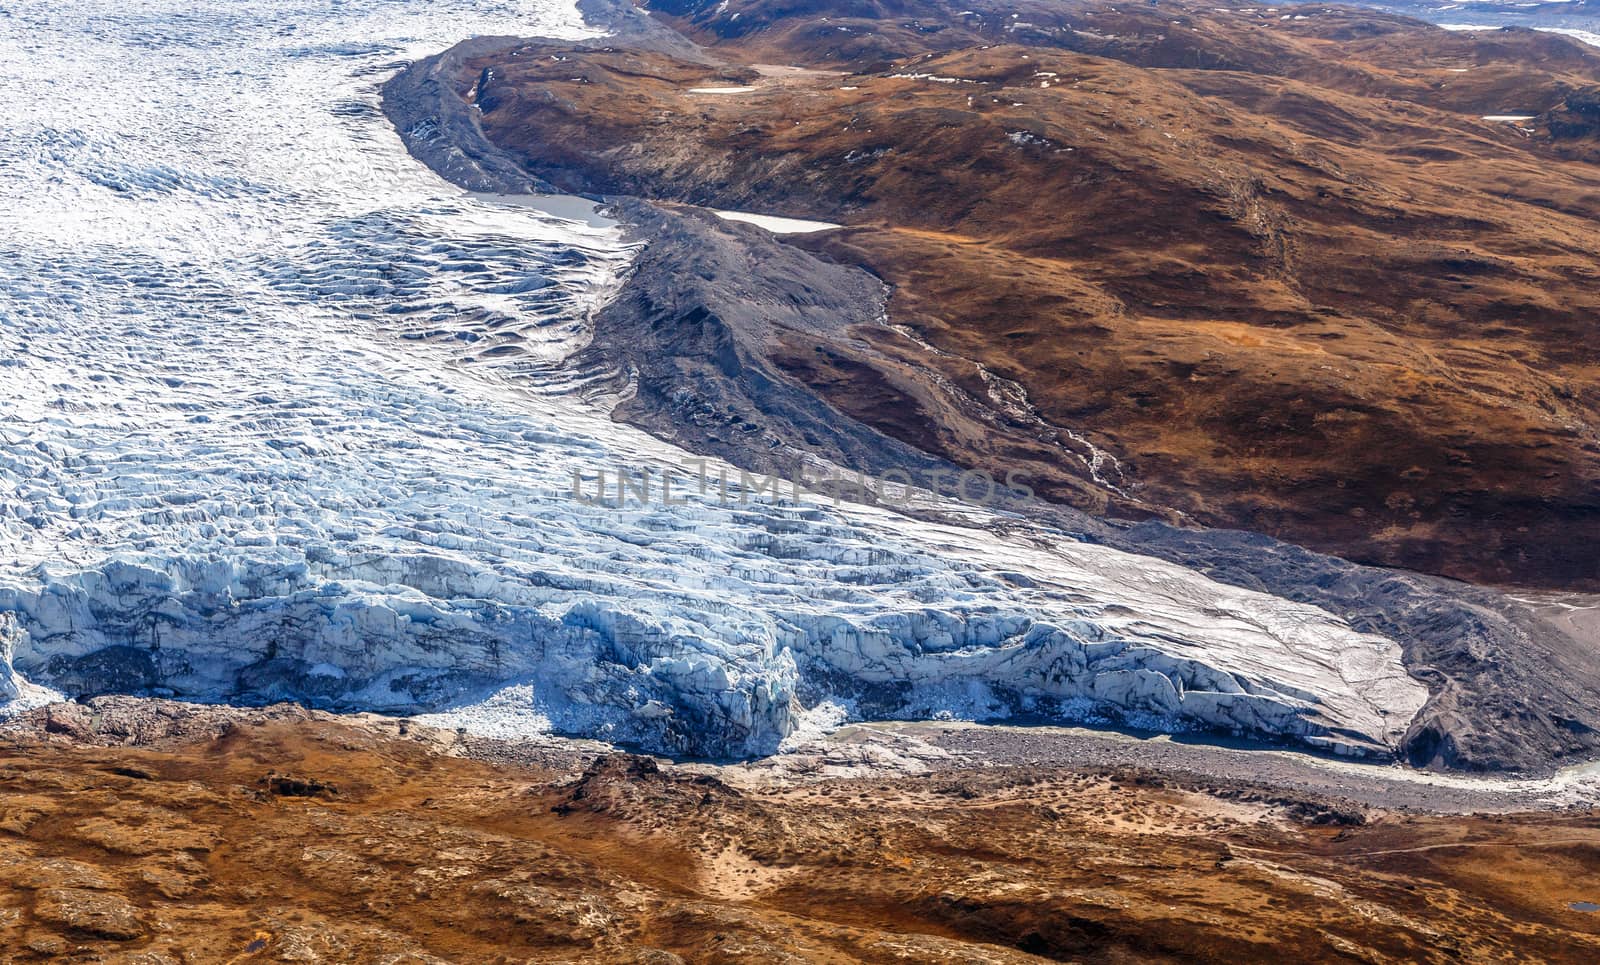 Greenlandic ice cap melting glacier with tundra aerial view, nea by ambeon